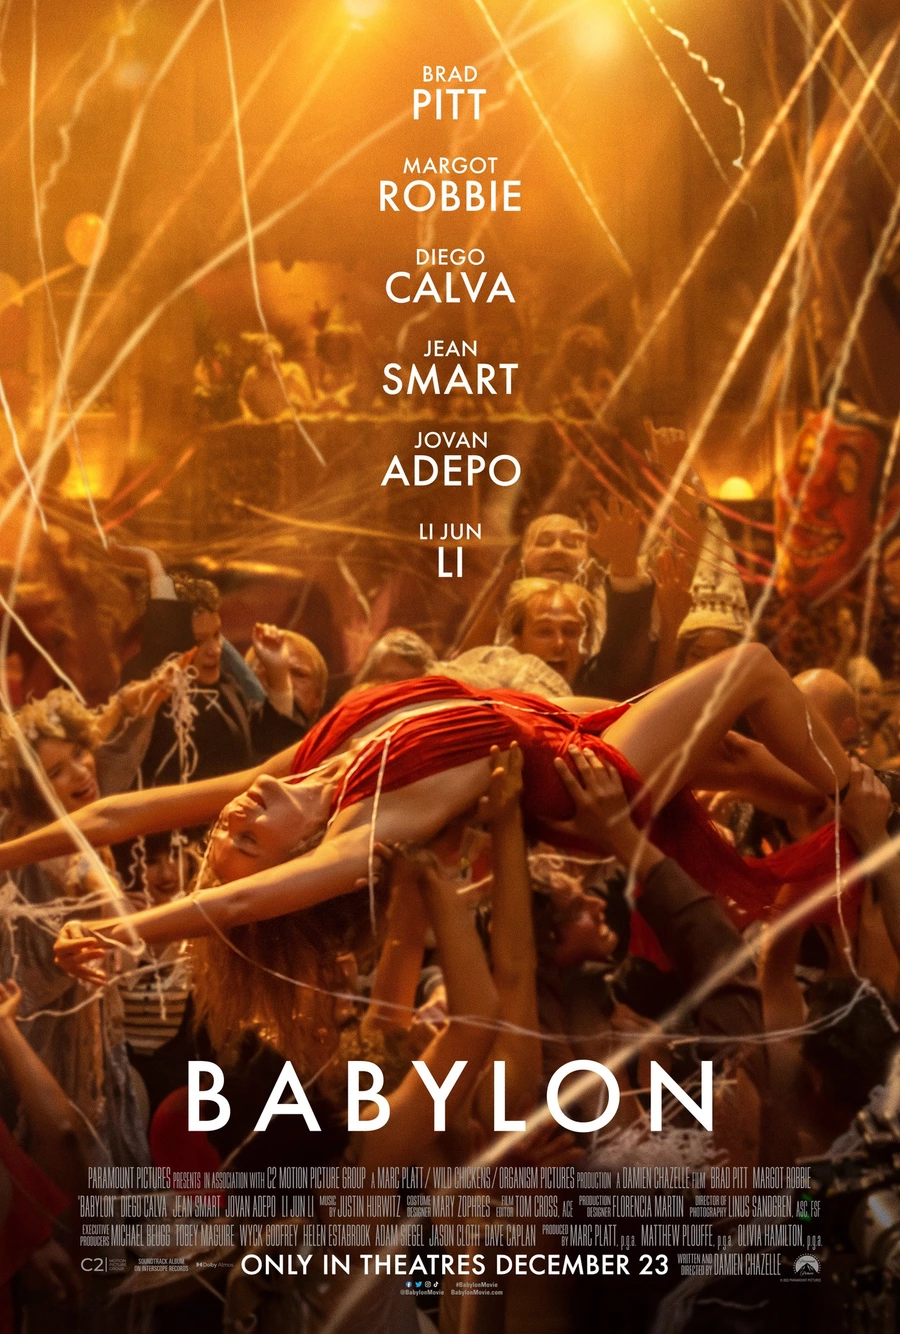 New poster for Damien Chazelle's film Babylon, starring Brad Pitt, Margot Robbie and Diego Calva.. It is a tale of unbridled ambition and shocking excess, in which various characters reach highs and suffer stunning falls during a period of rampant decadence and depravity in early Hollywood.

In cinemas from January 19.